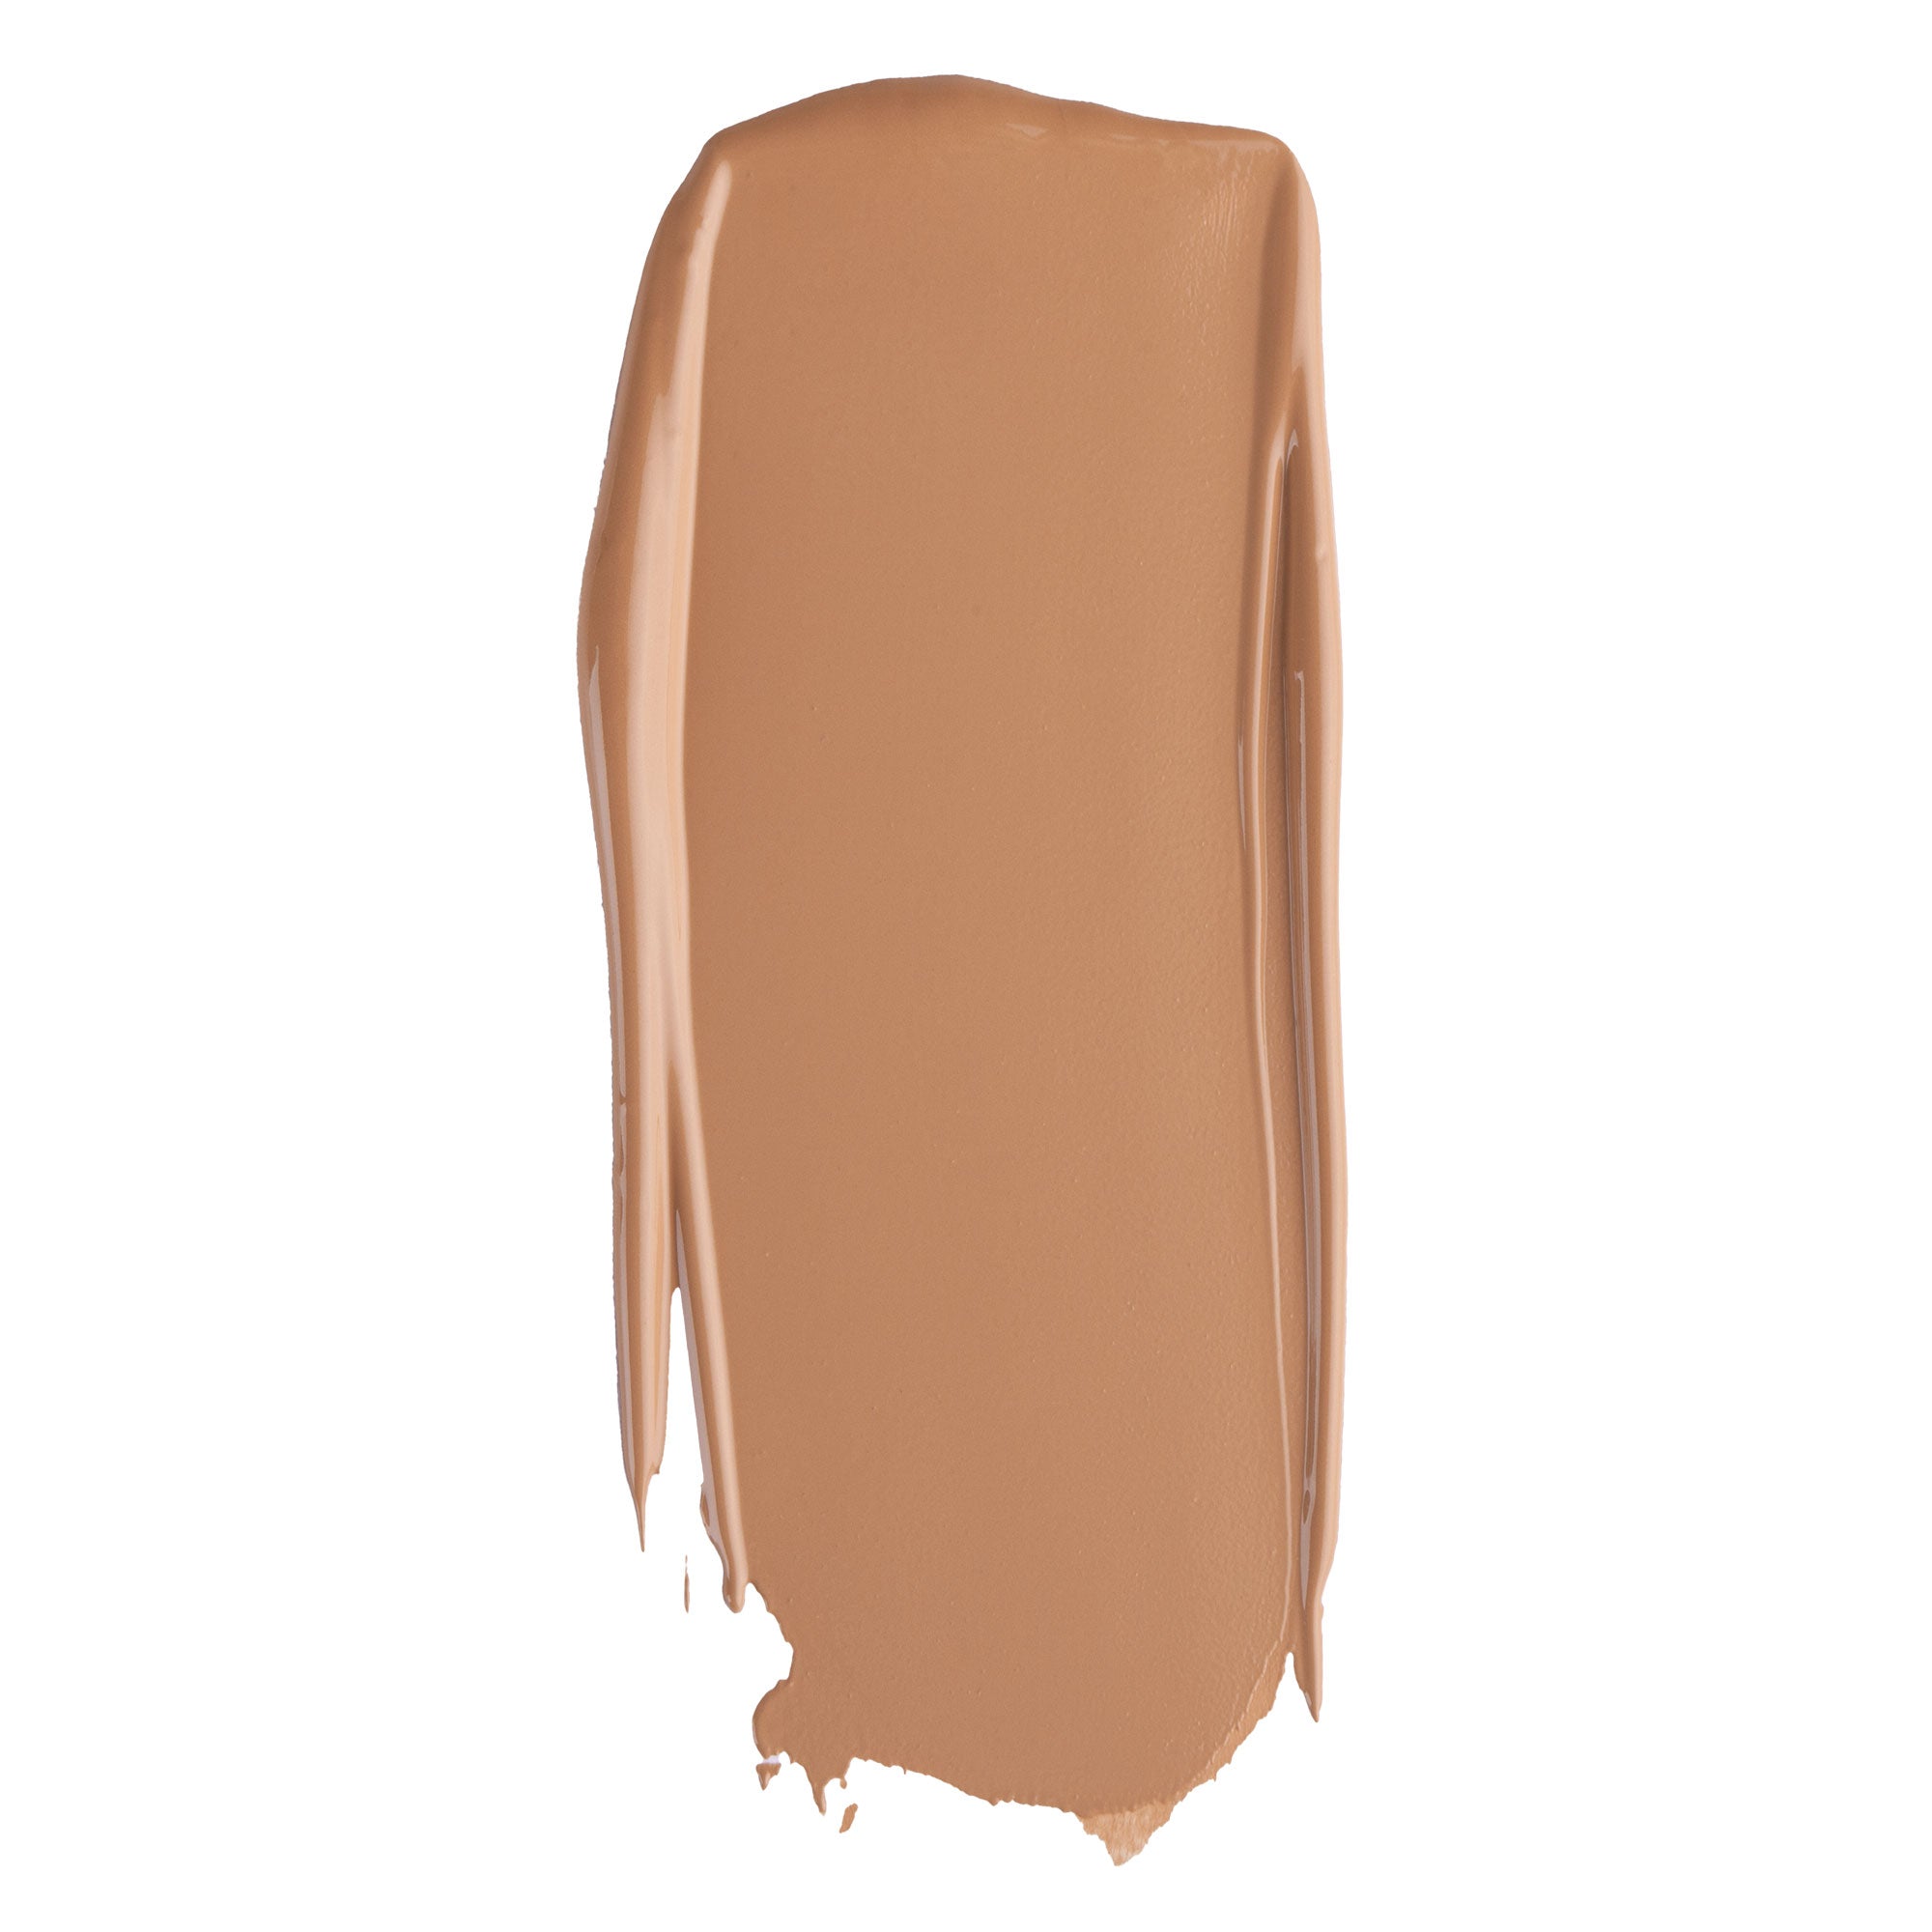 HD Perfect Coverup Foundation 77 - Inglot Cosmetics